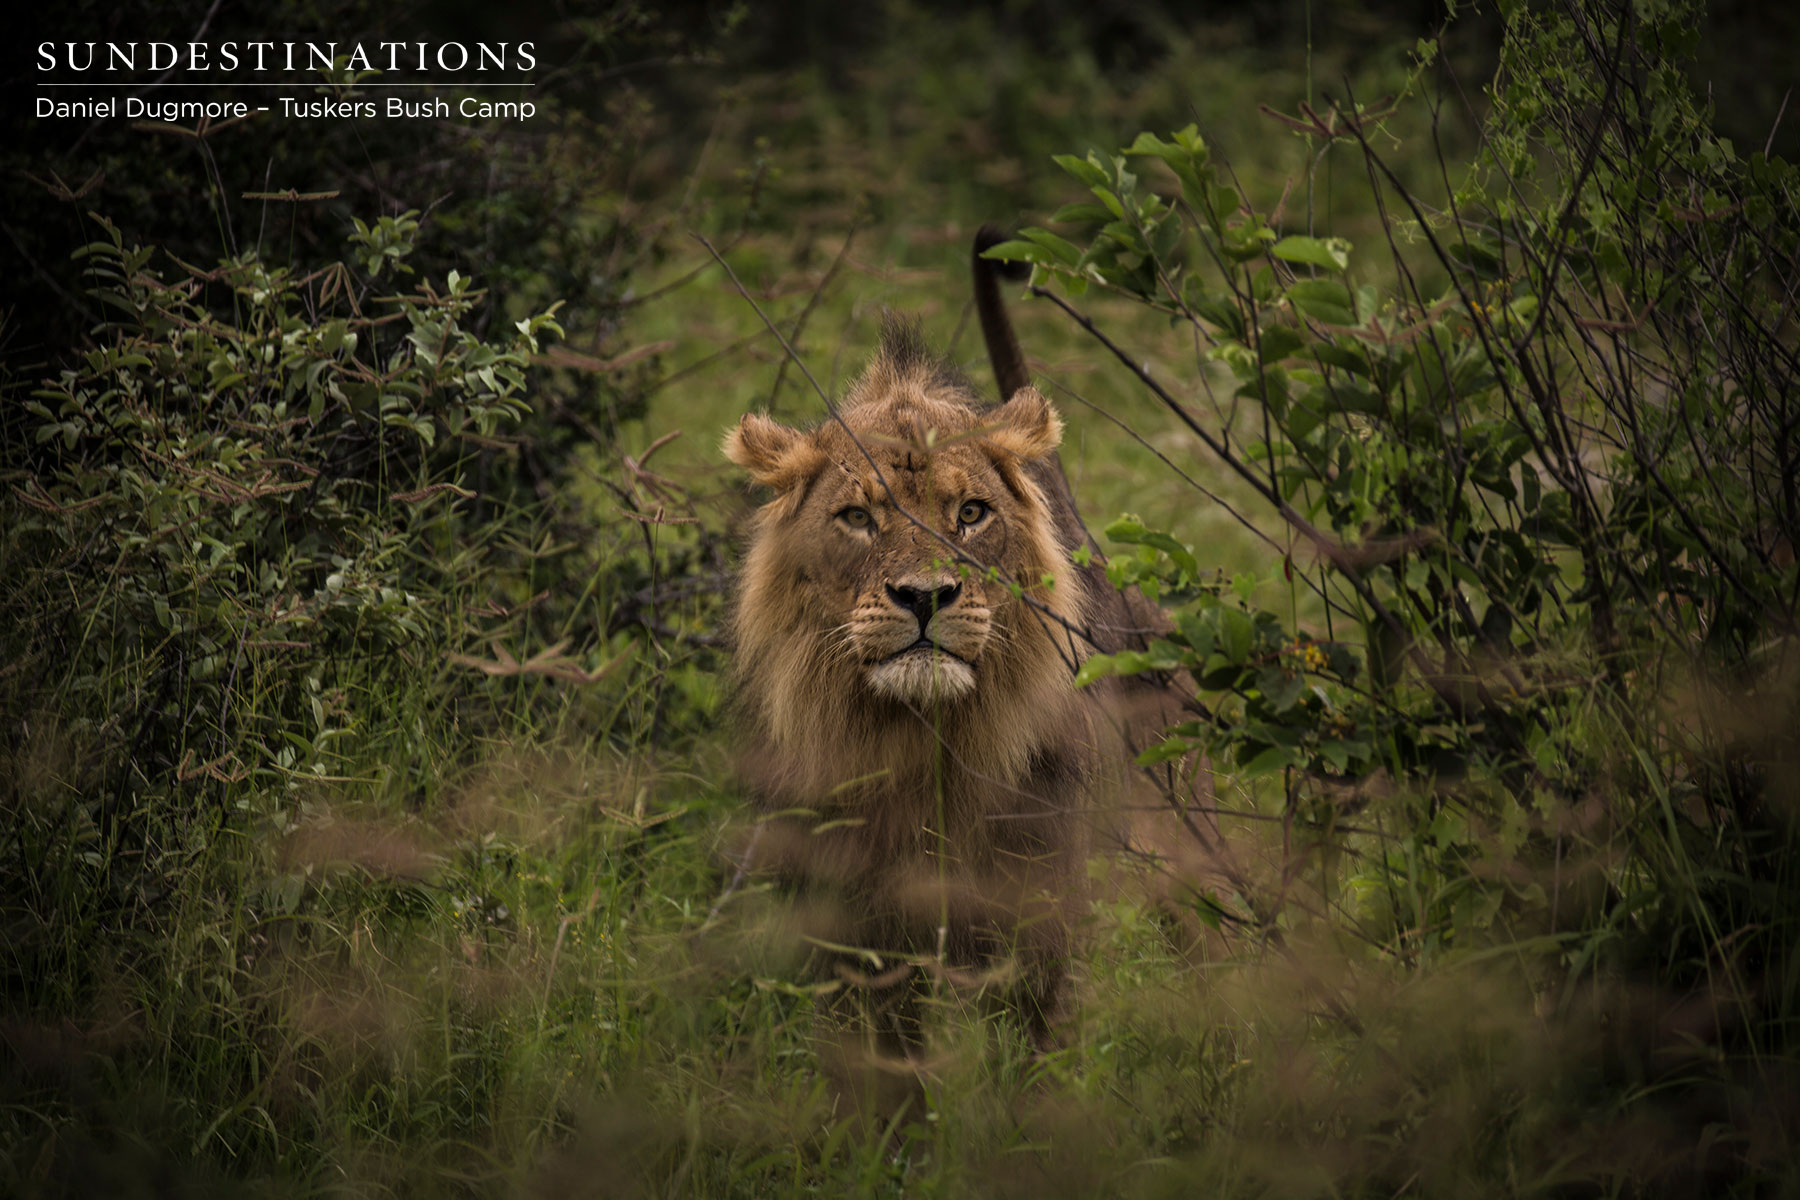 Tuskers Male Lion in the Grass